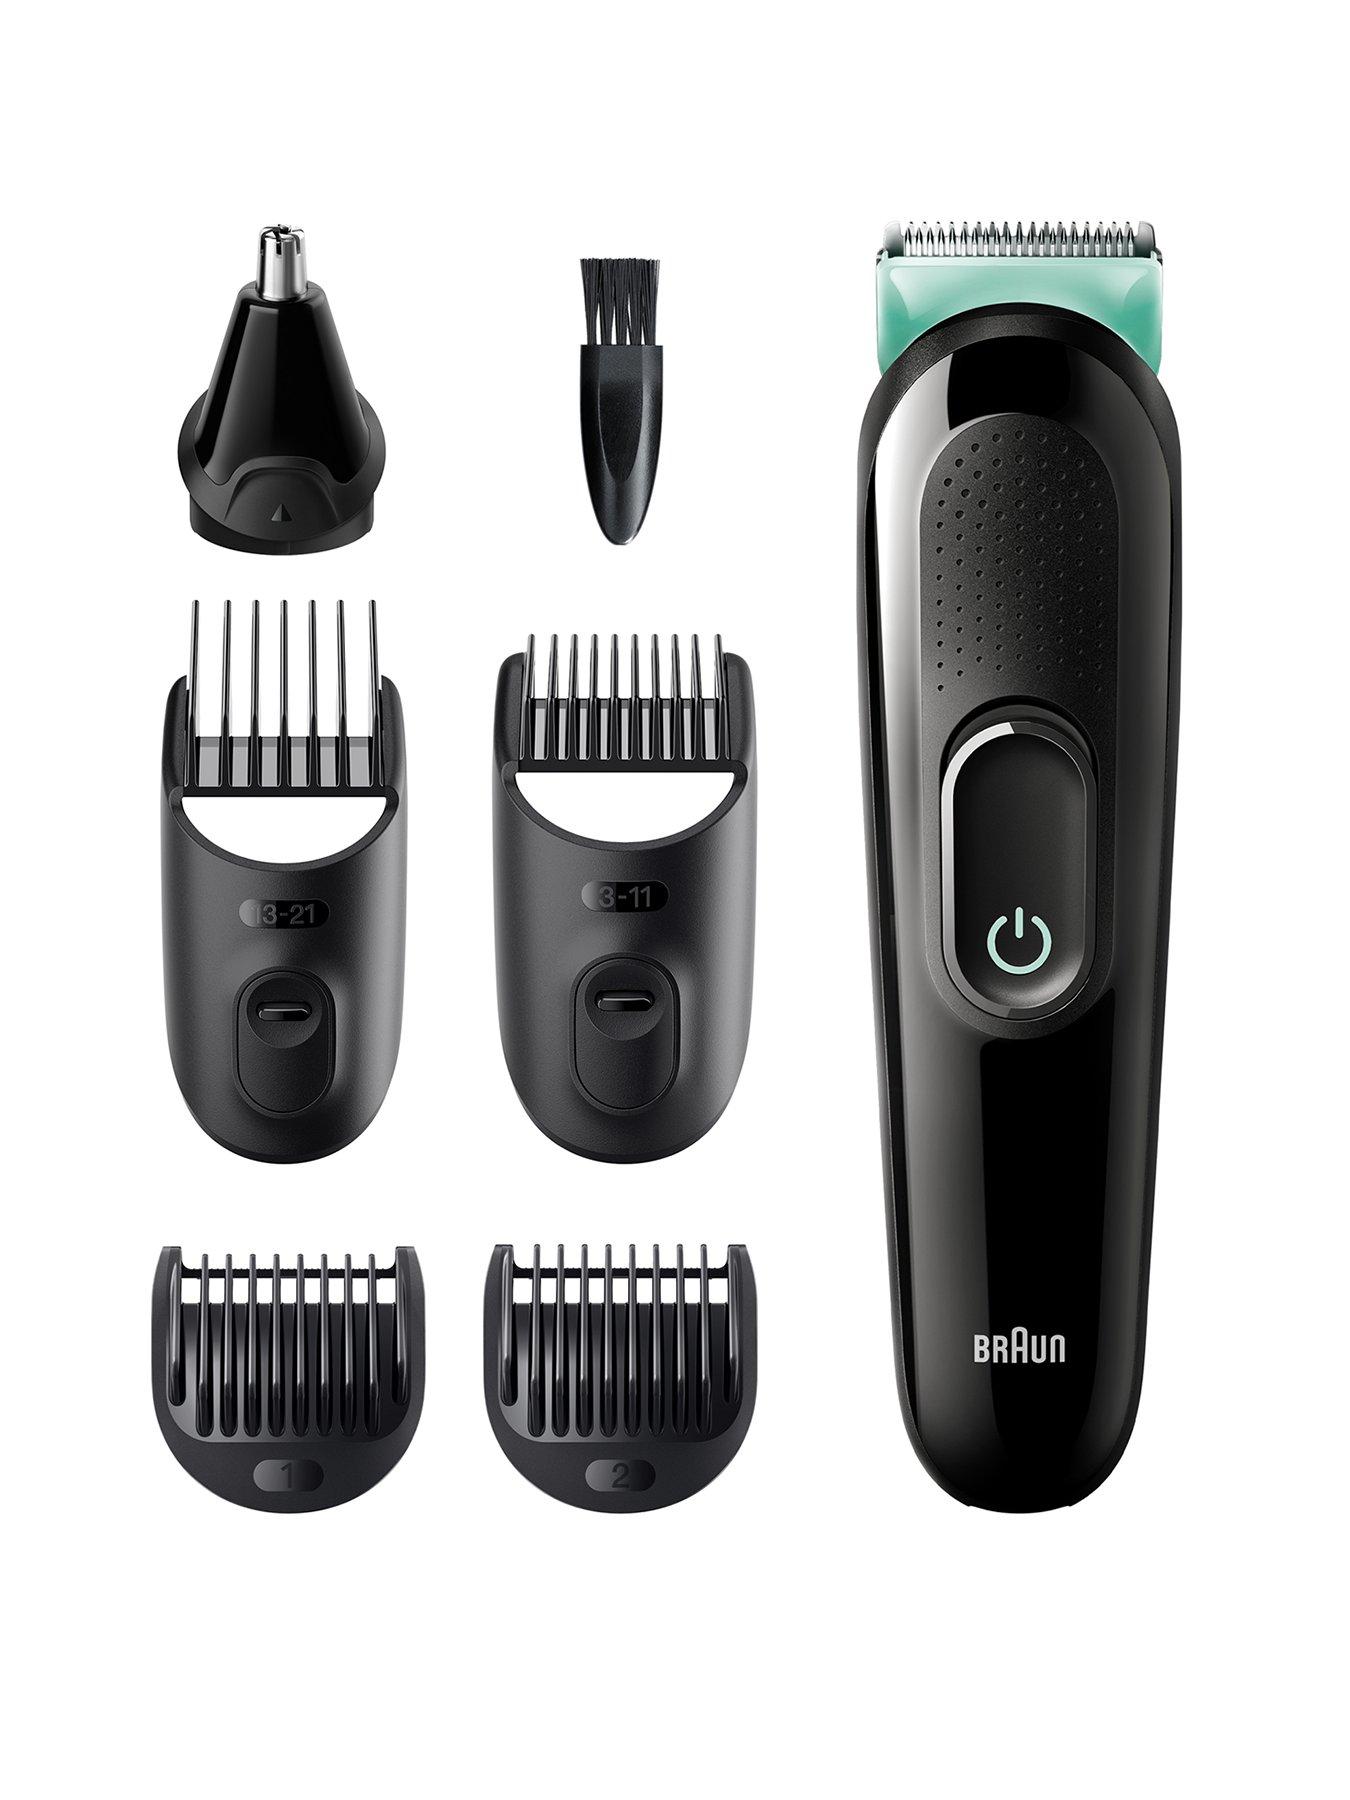 rotary hair clippers uk